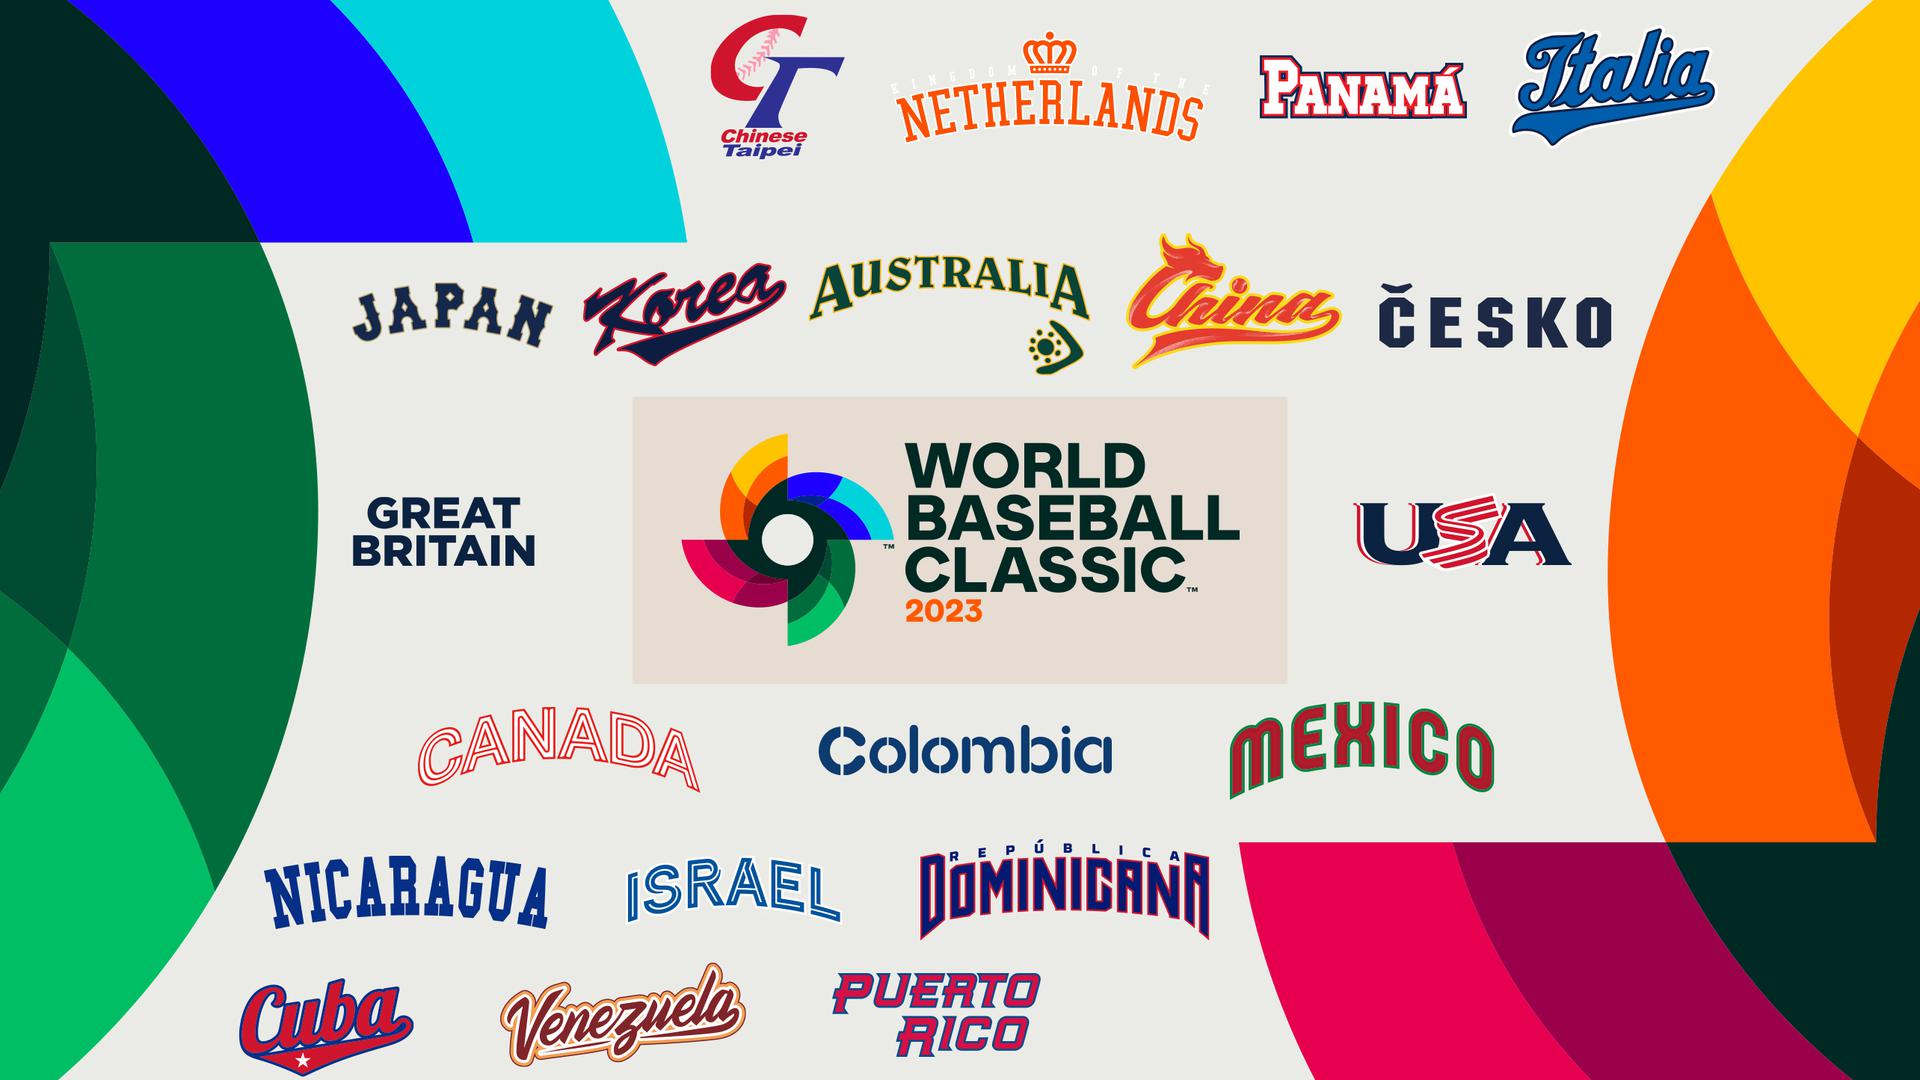 The World Baseball Classic logo in the center, surrounded by logos of the participating nations